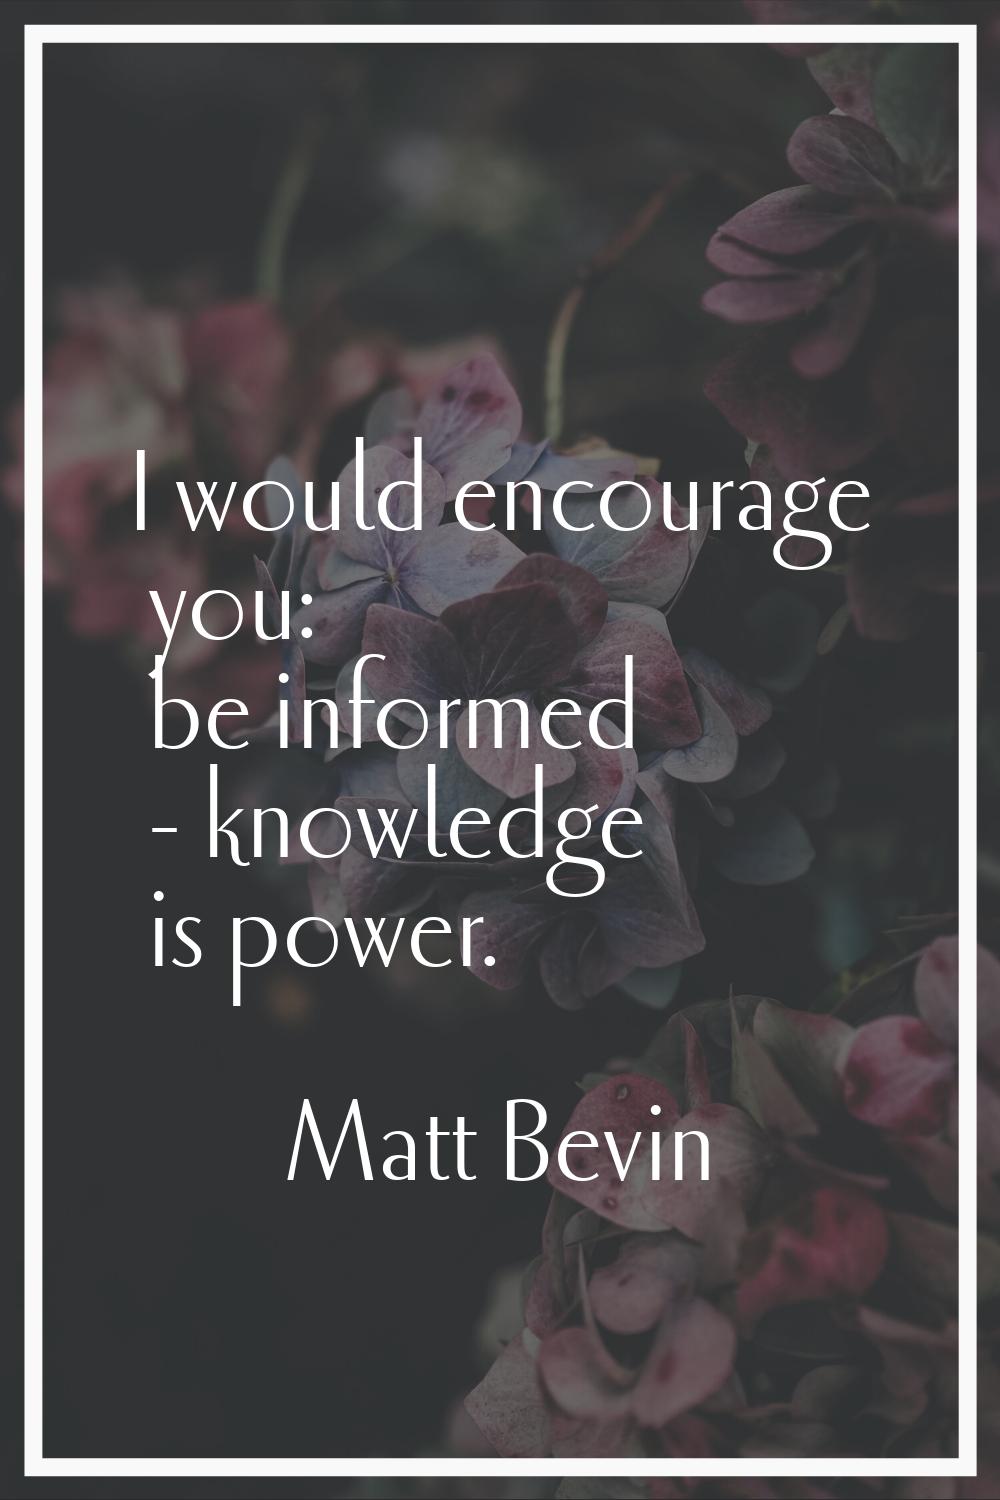 I would encourage you: be informed - knowledge is power.